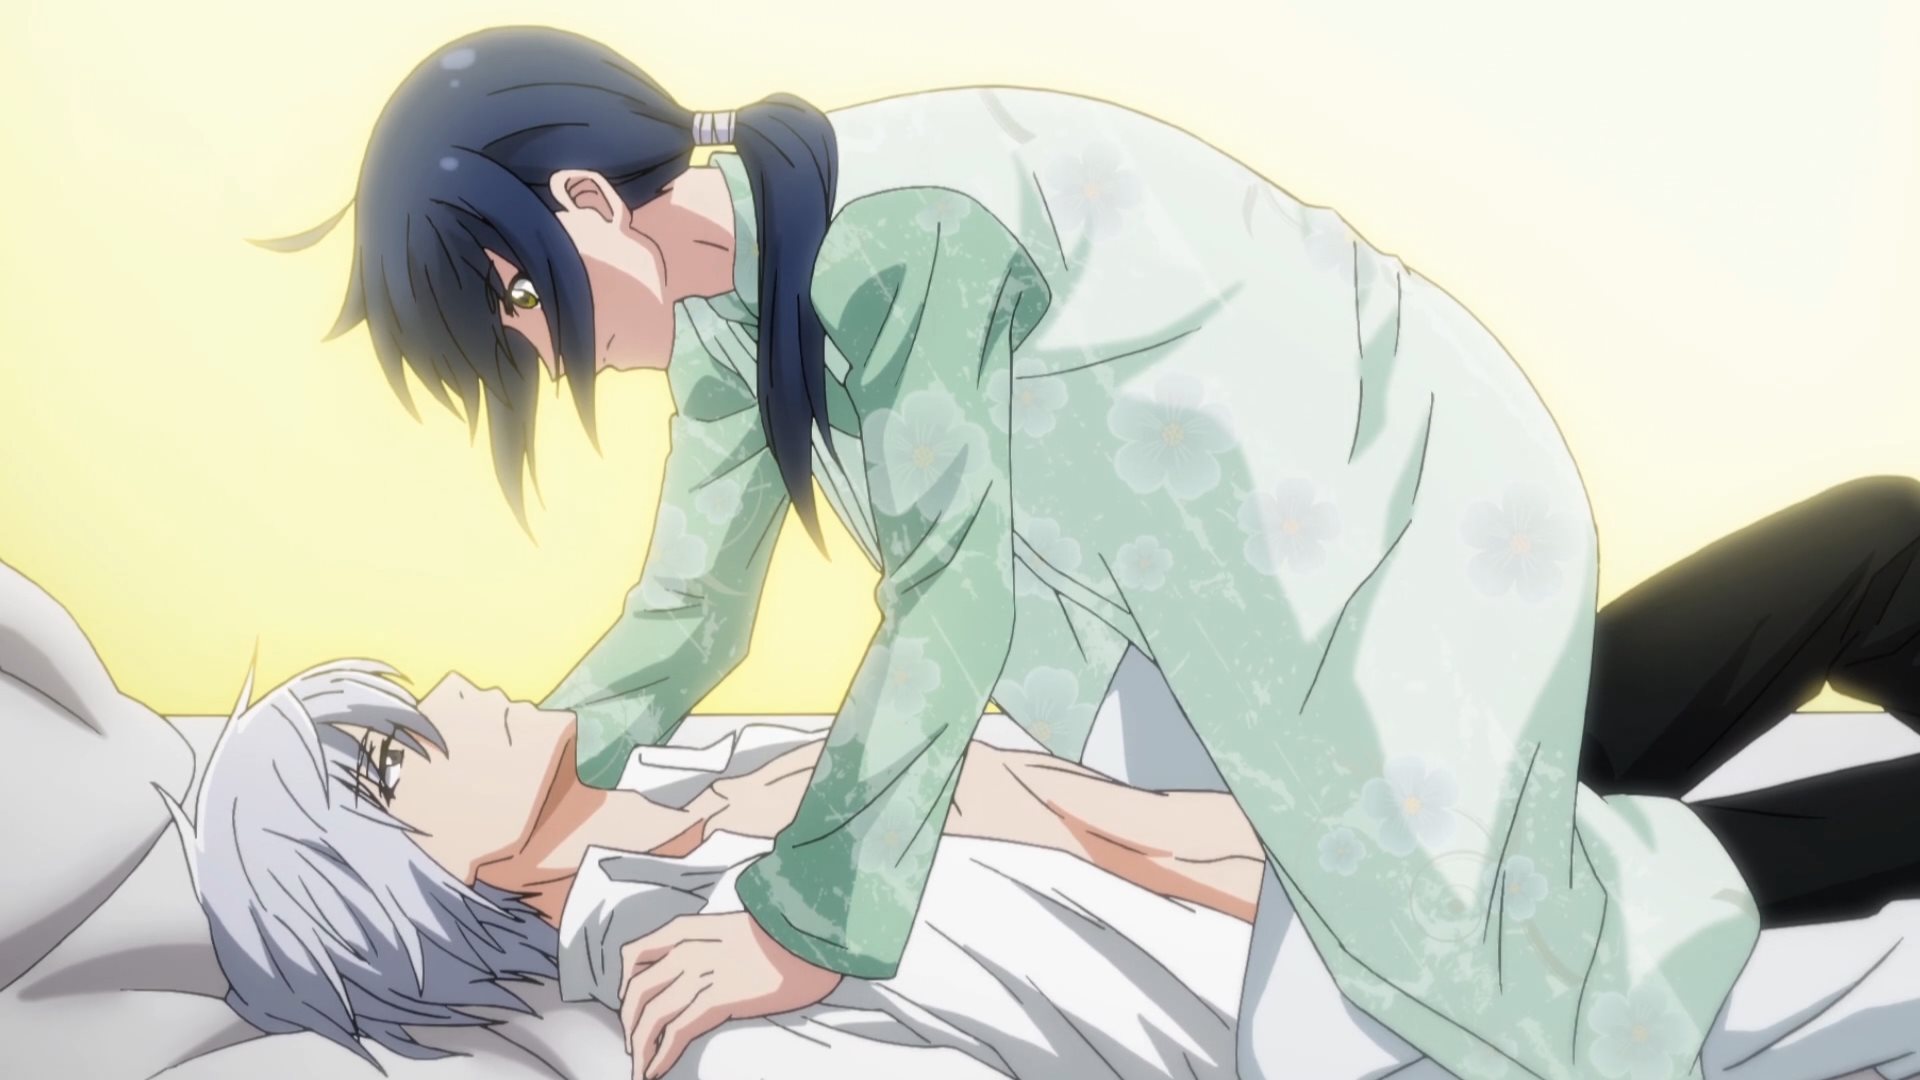 Rotten BL Reviews on X: NEW ANIME REVIEW: Spiritpact - Episode 2